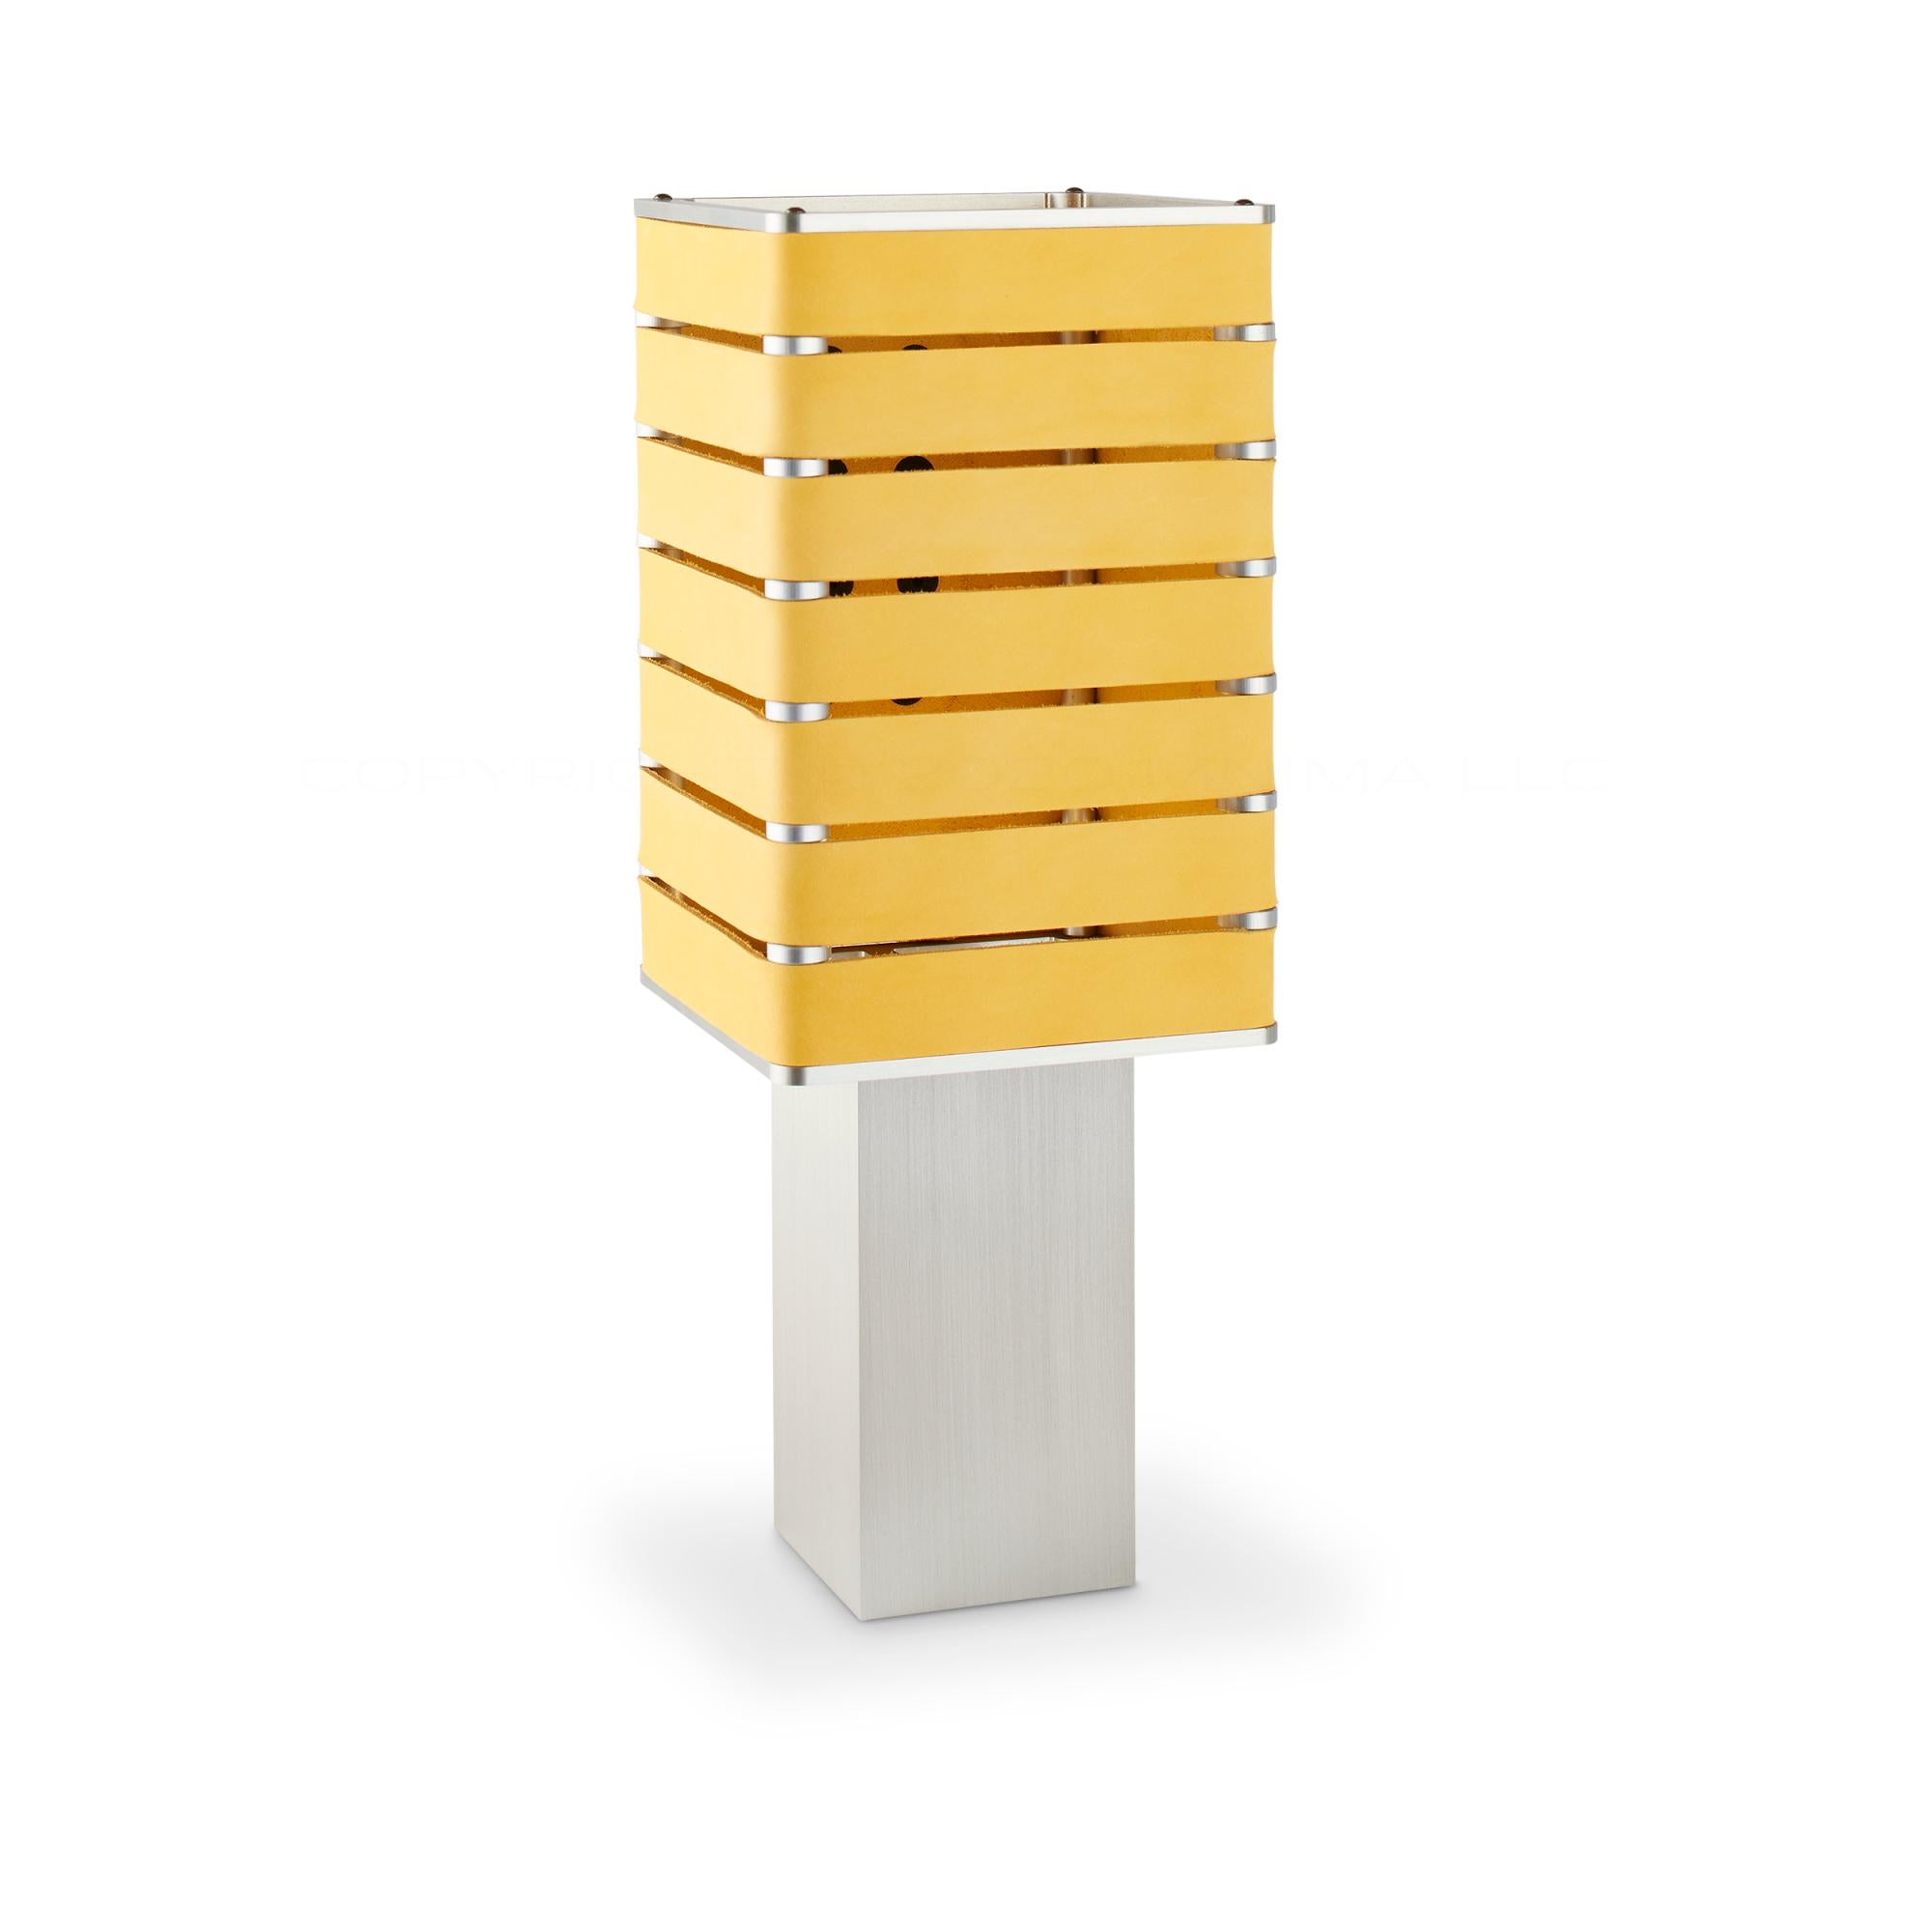 Modern, Minimal, Solid Metal Table Light in Limon Yellow Italian Leather with Matte Black Snaps.

Introducing Exigen, the customizable lighting platform from mnima.  Presented in an array of crisp, eye-catching colors, Exigen offers maximum